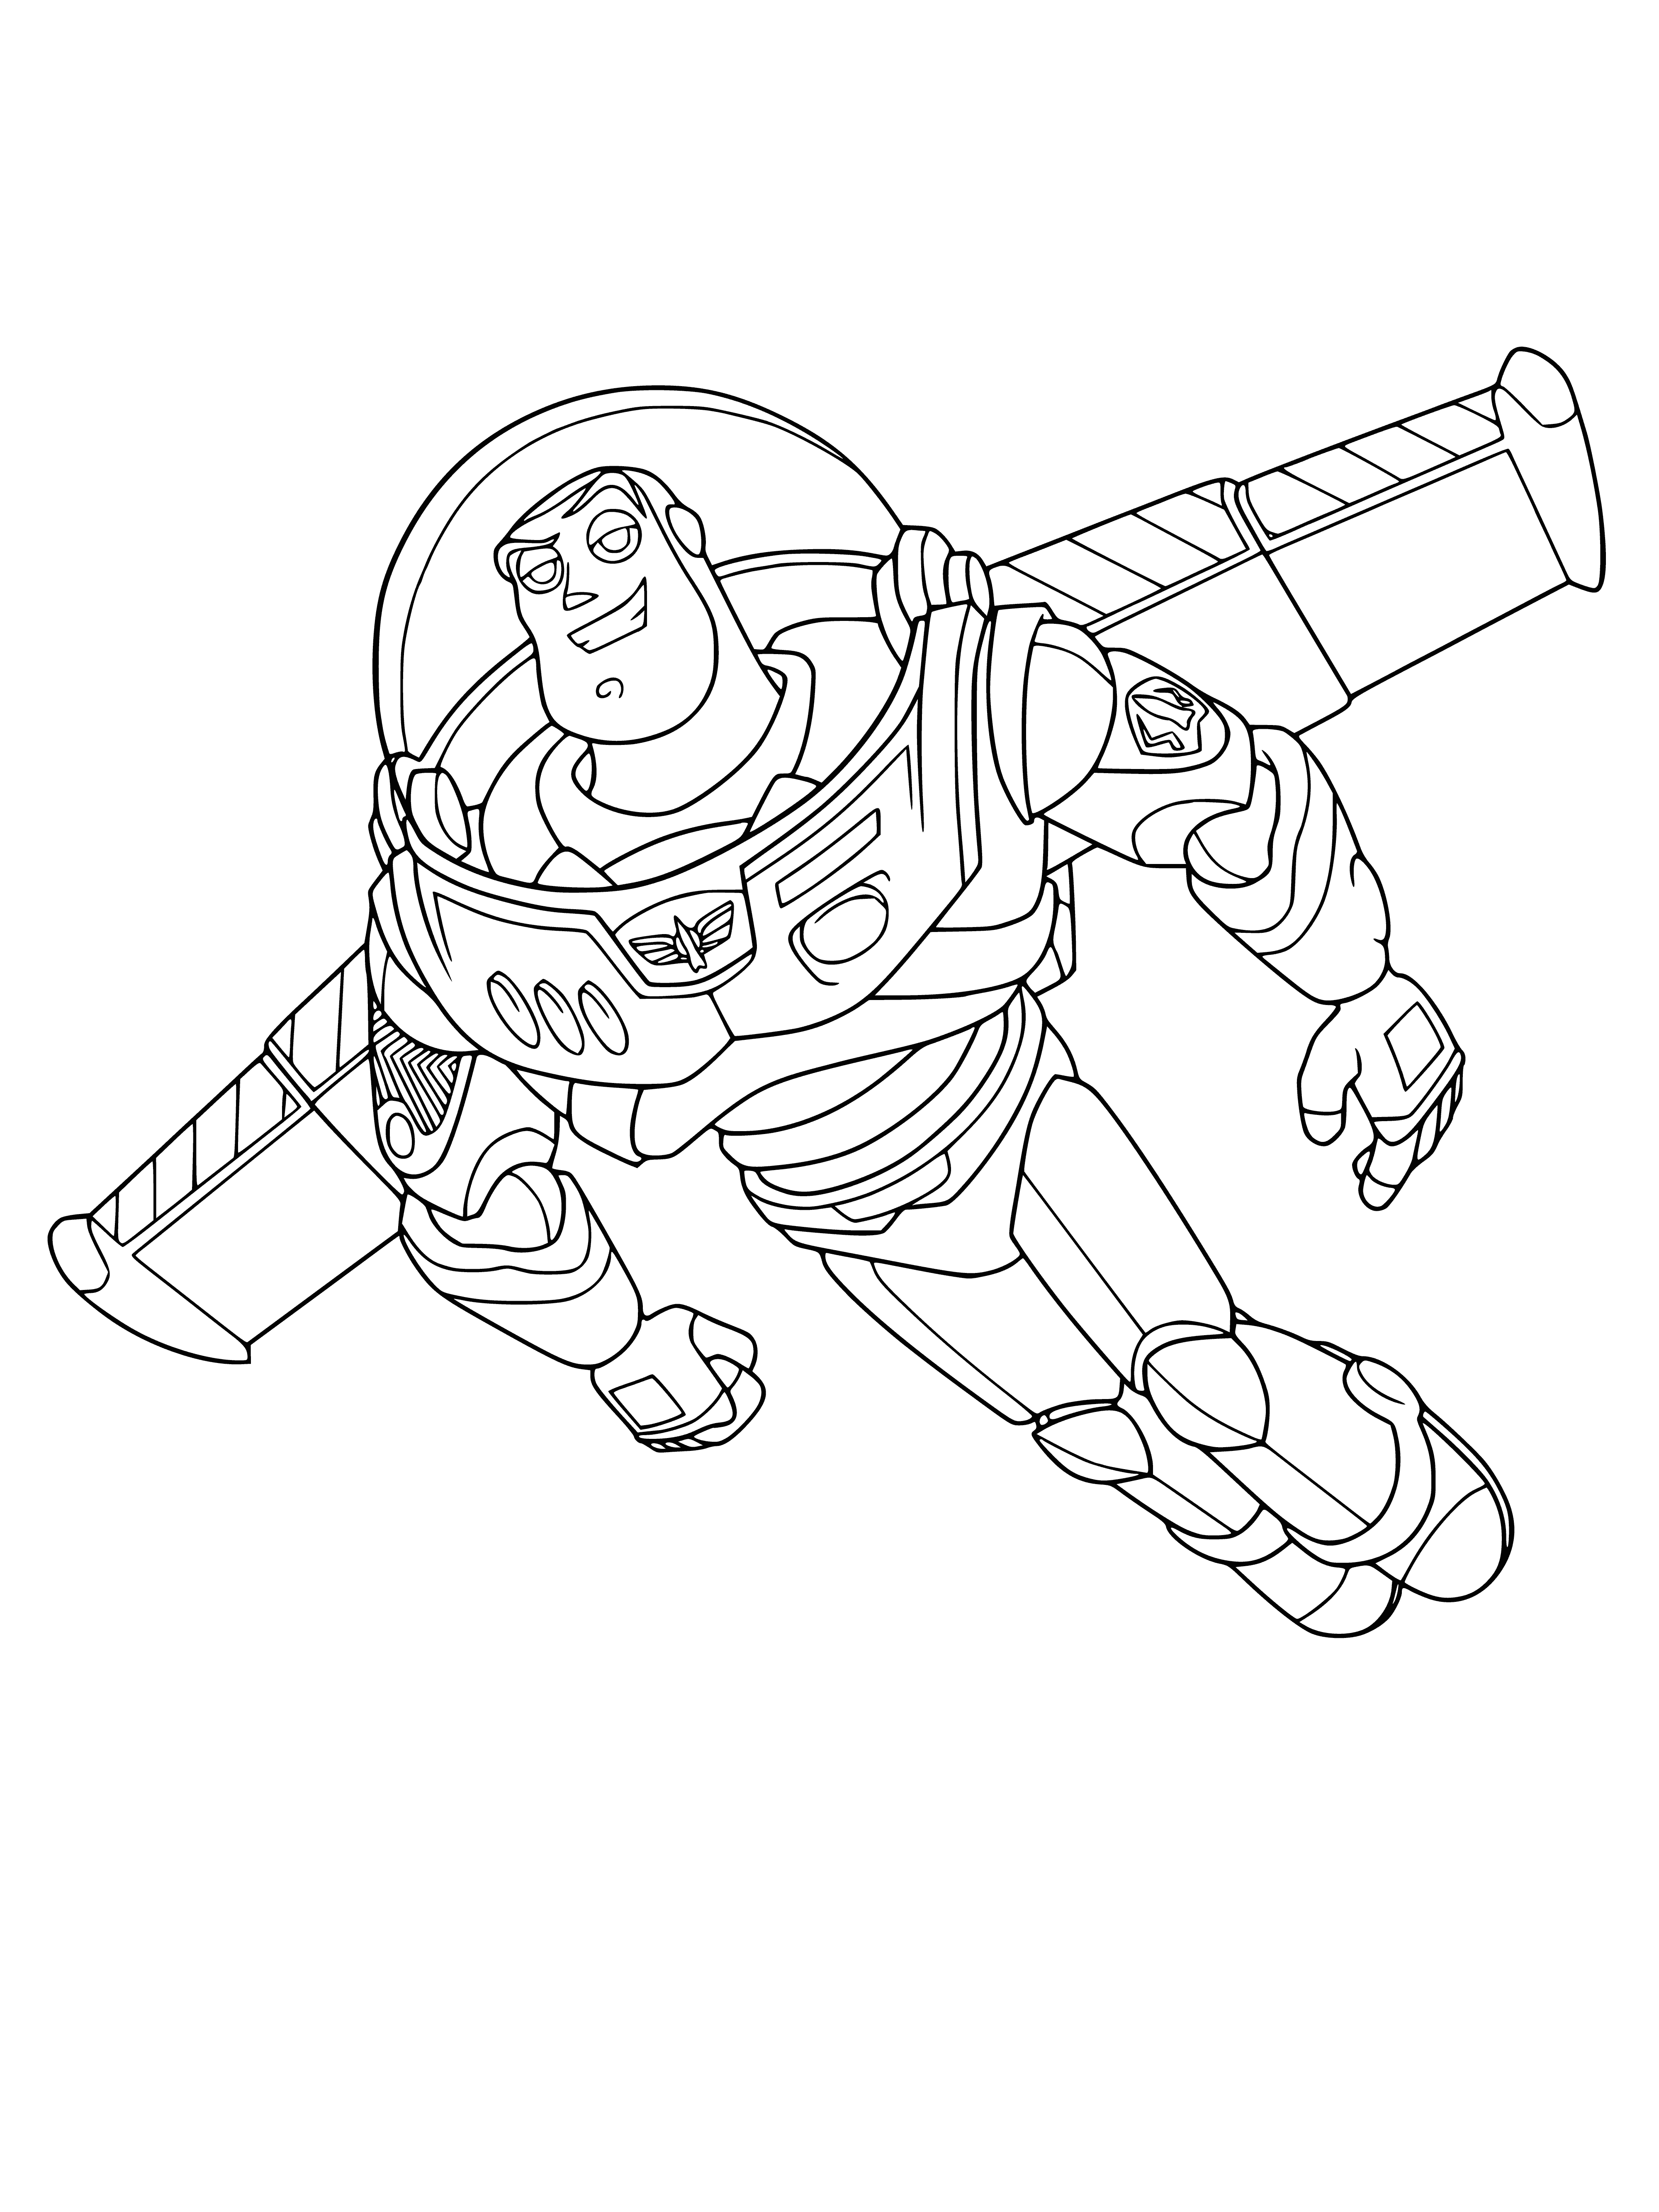 coloring page: Toy Story's Buzz Brightwing in his space suit and wingsuit, holding a ray gun & shield, against a space background.